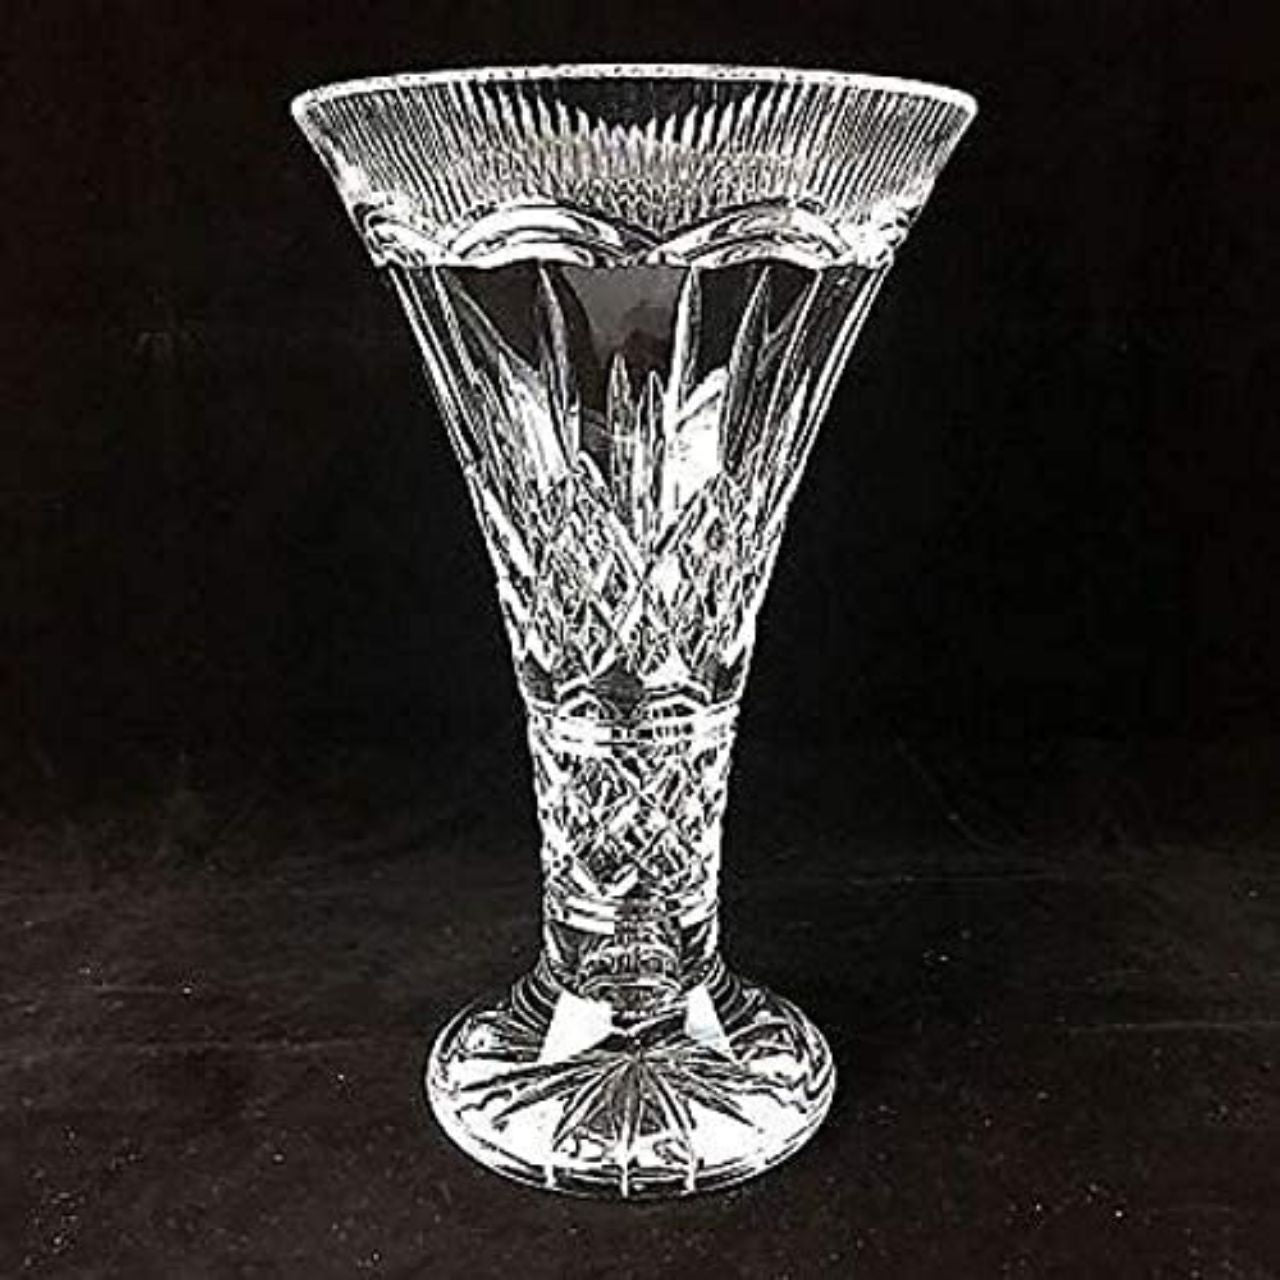 Lismore 35cm Statement Vase by Waterford Crystal  Waterford Lismore Statement Vase - The Waterford Lismore pattern is a stunning combination of brilliance and clarity. You can't improve on nature, but you can come close with the Lismore Statement Vase. Accentuate the beauty of roses, floral arrangements and cut flowers with this stunning fine crystal vase patterned with Lismore's signature diamond and wedge cuts.